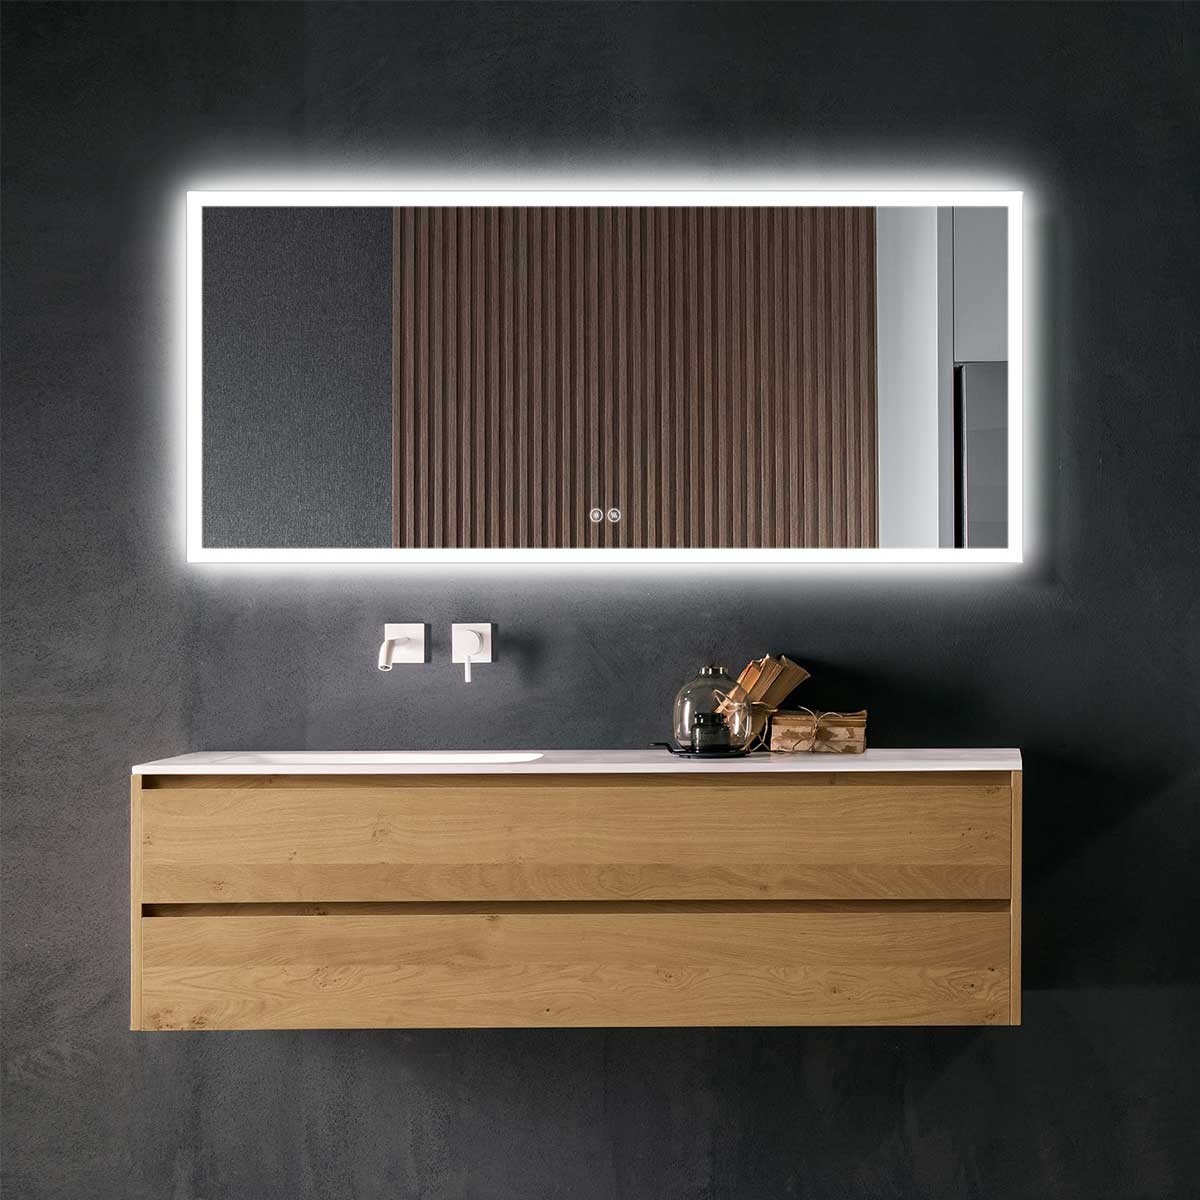 DECORAPORT 70 x 32 Inch LED Bathroom Mirror with Touch Button, Anti Fog, Dimmable, Vertical & Horizontal Mount (D102-7032)